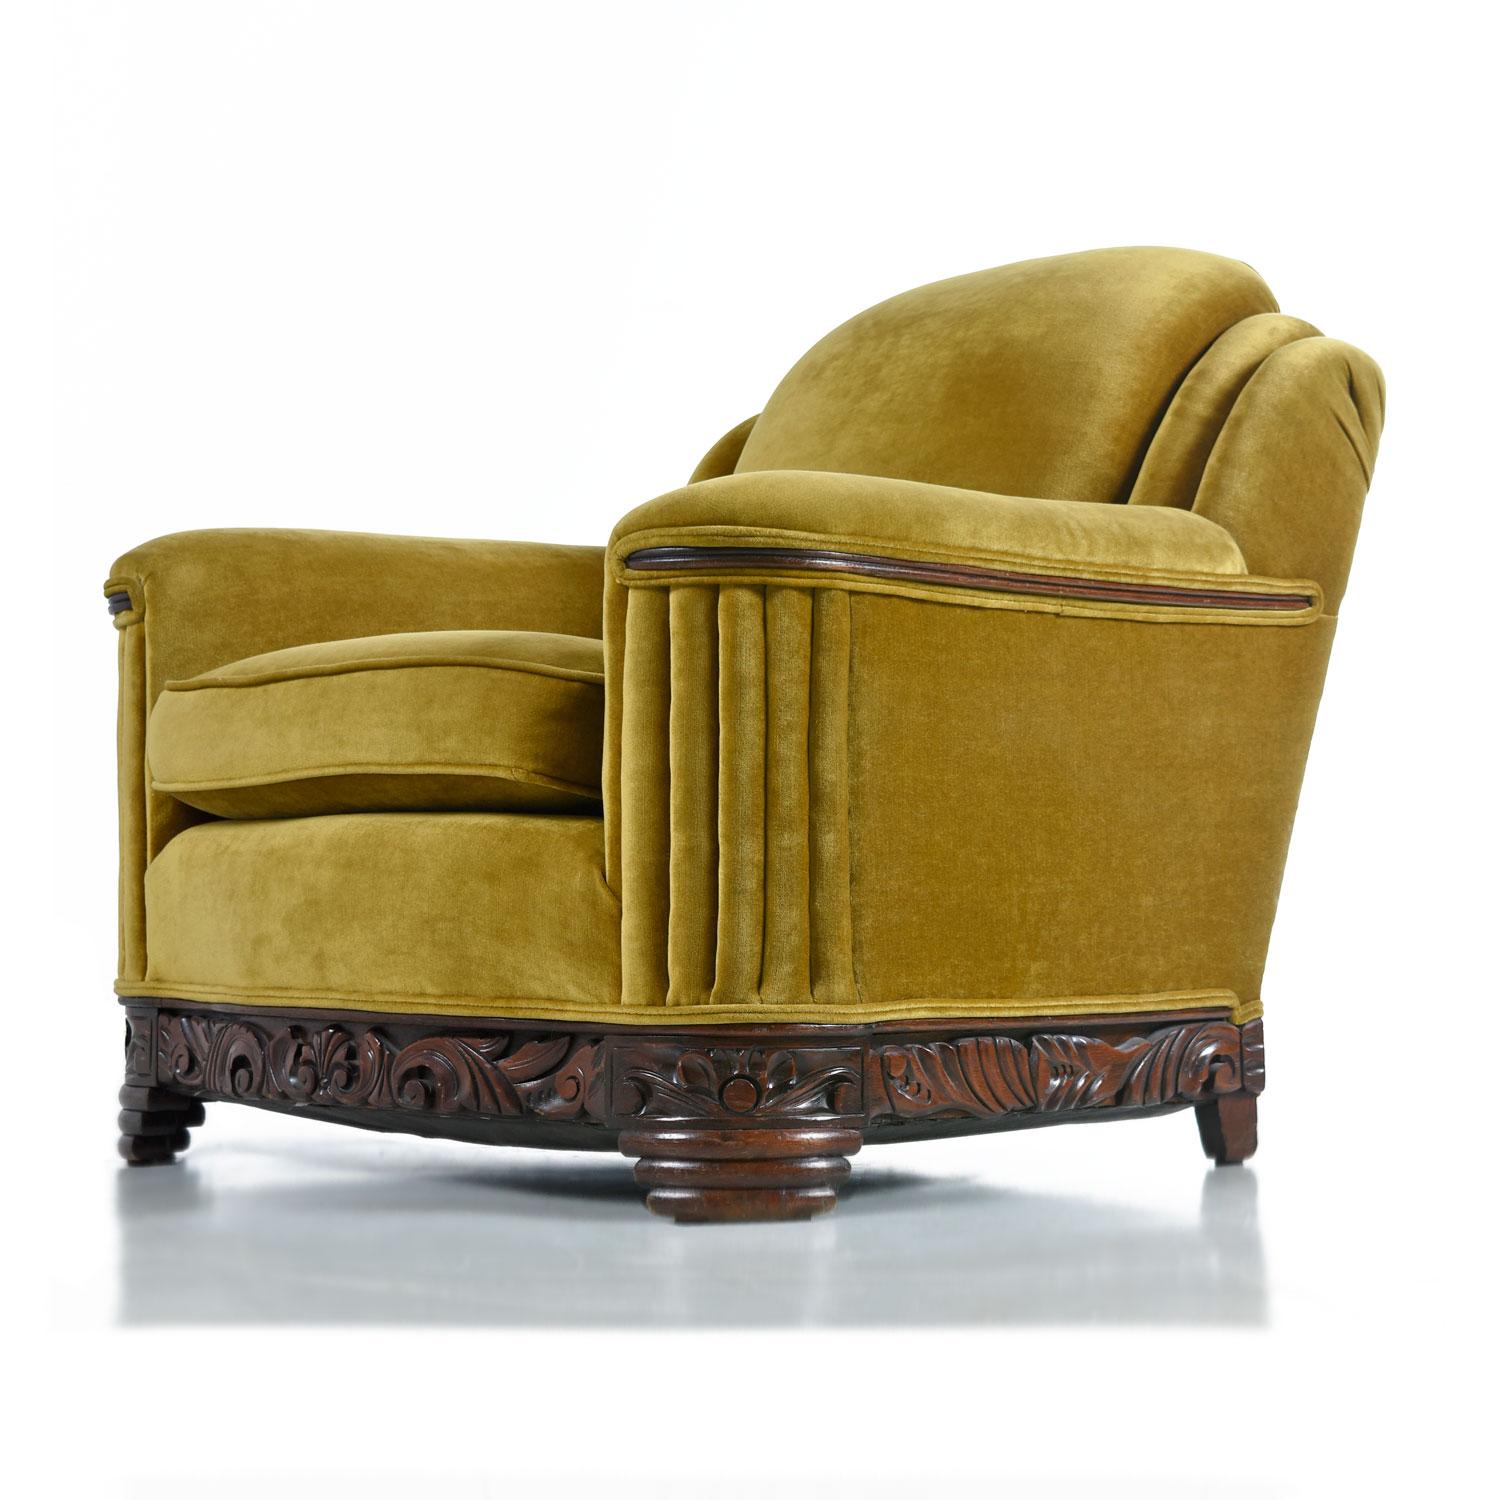 The soft and sensuous gold bronze mohair is in absolutely outstanding condition. Rippled waterfall style pleated tailoring is punctuated by the hand carved mahogany base and accents on the arms. One does not have to compromise comfort for style with